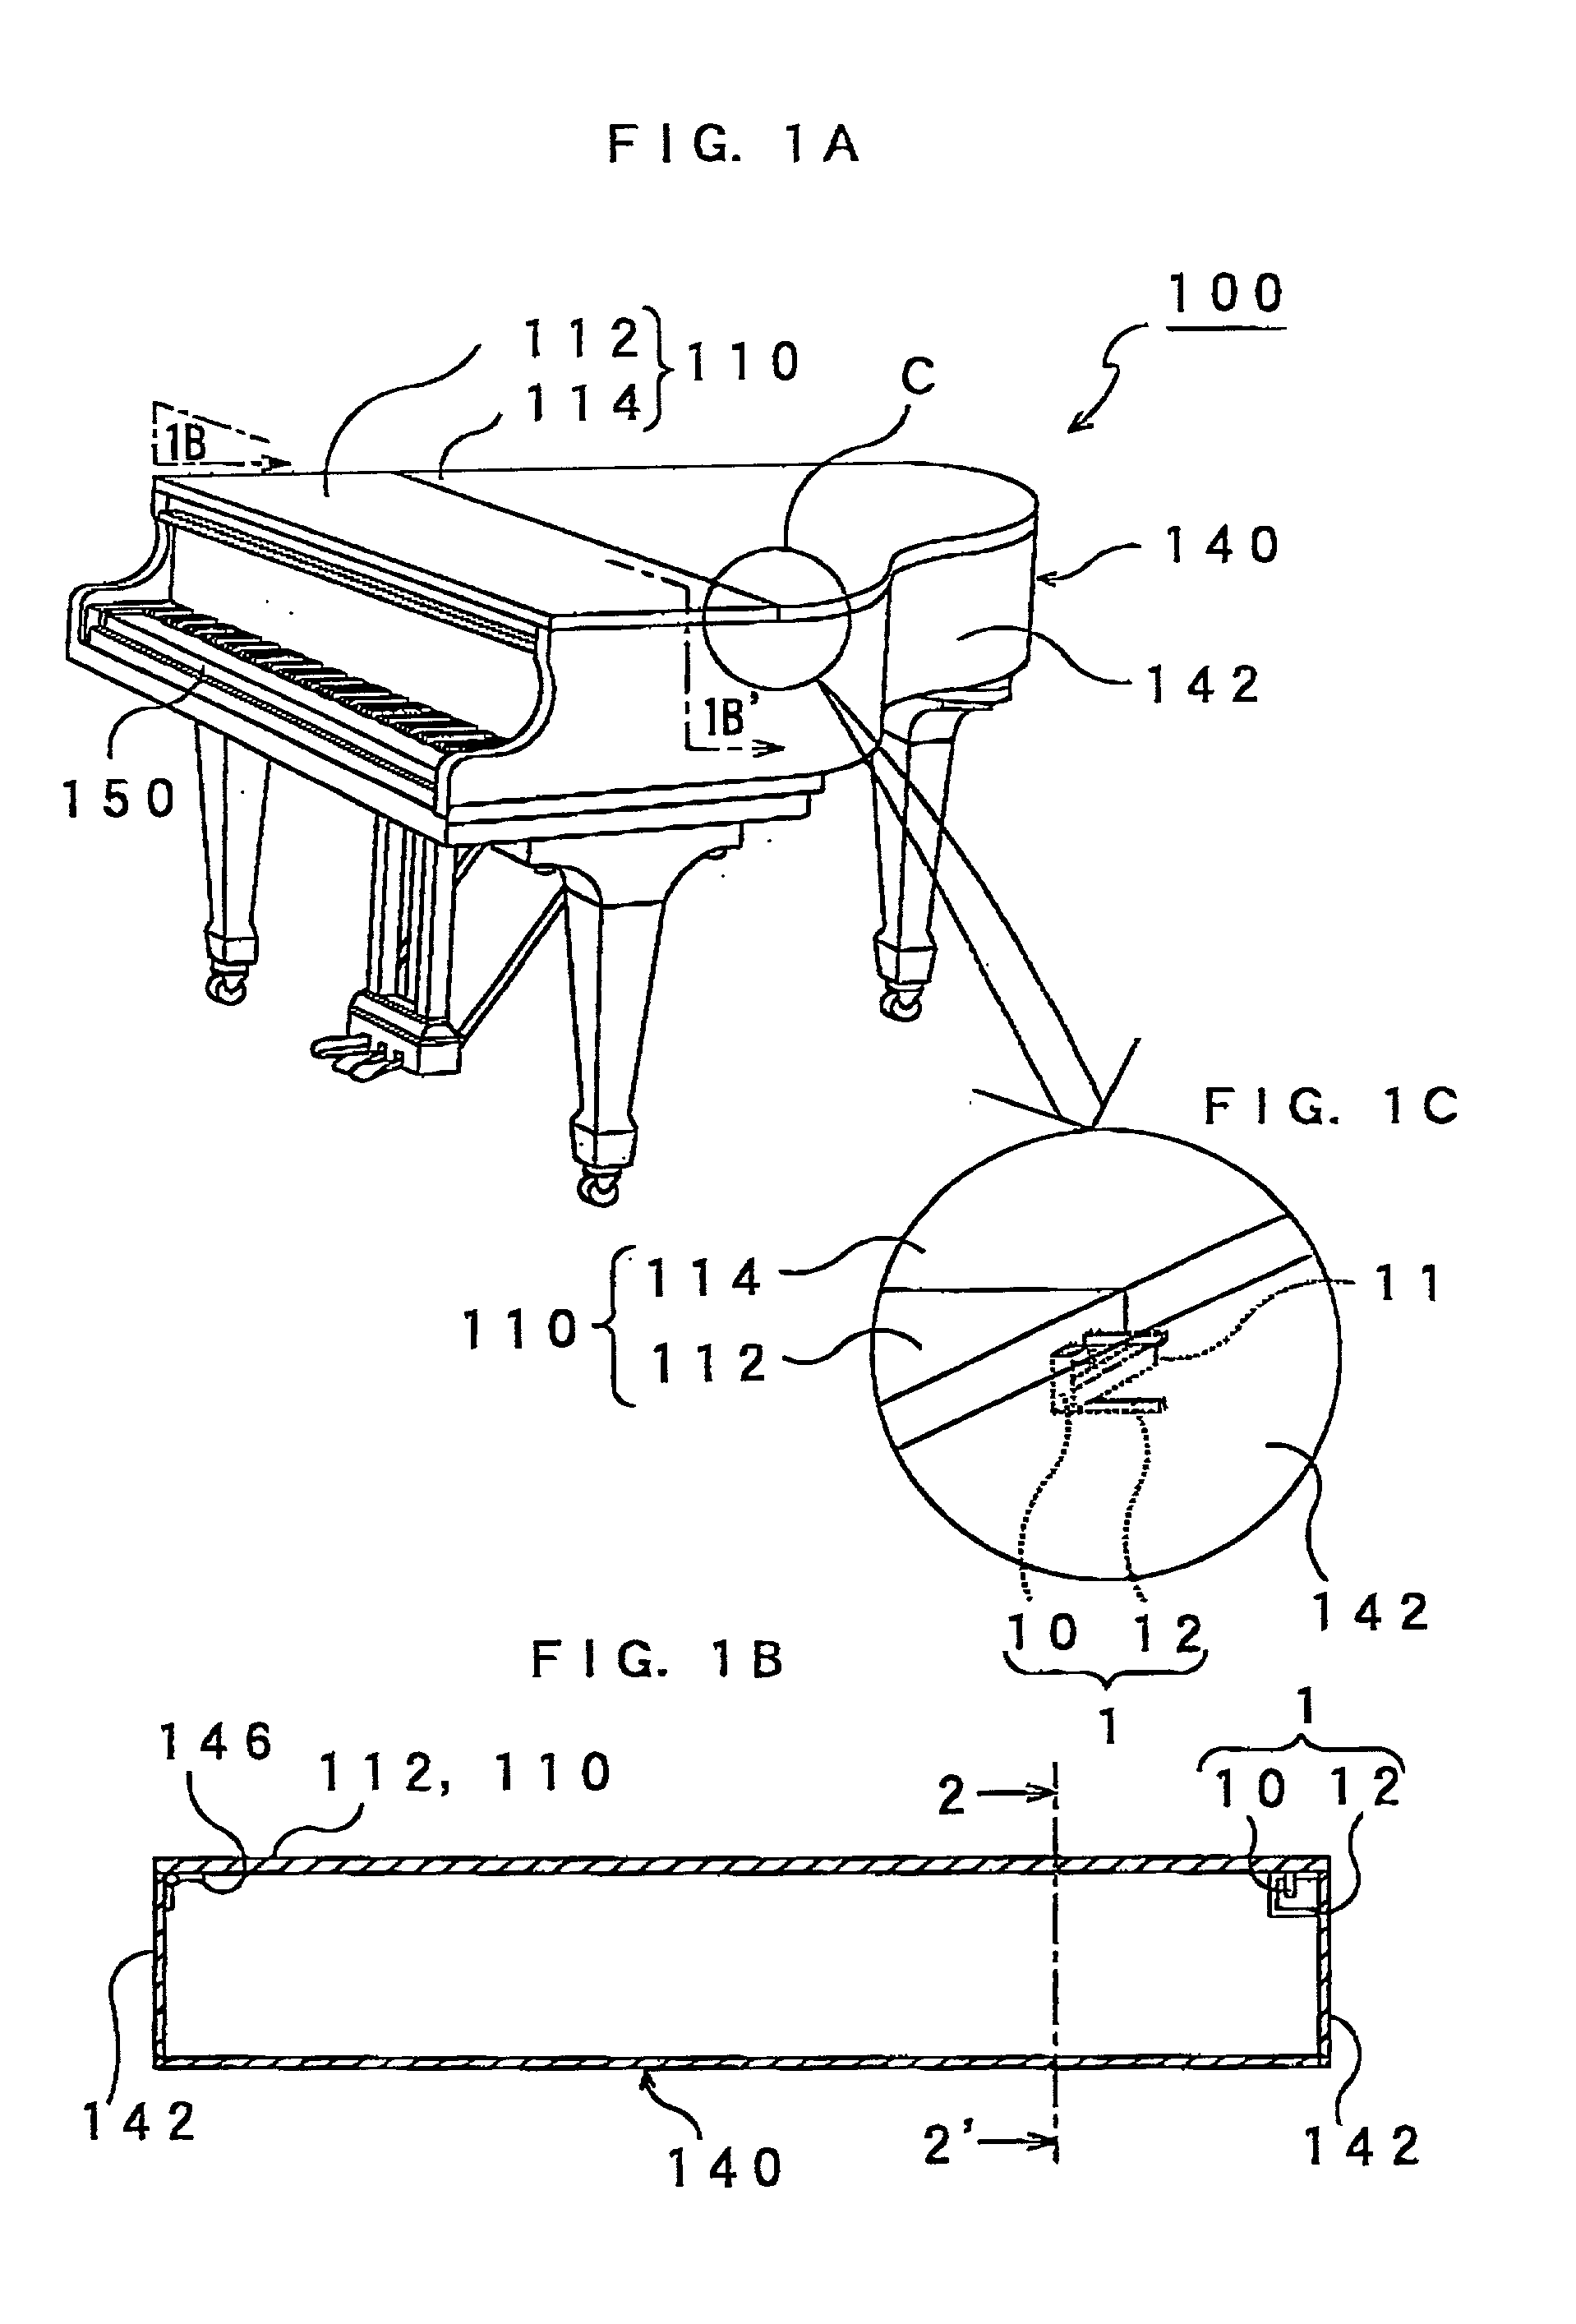 Erroneous opening prevention mechanism for a grand piano lid